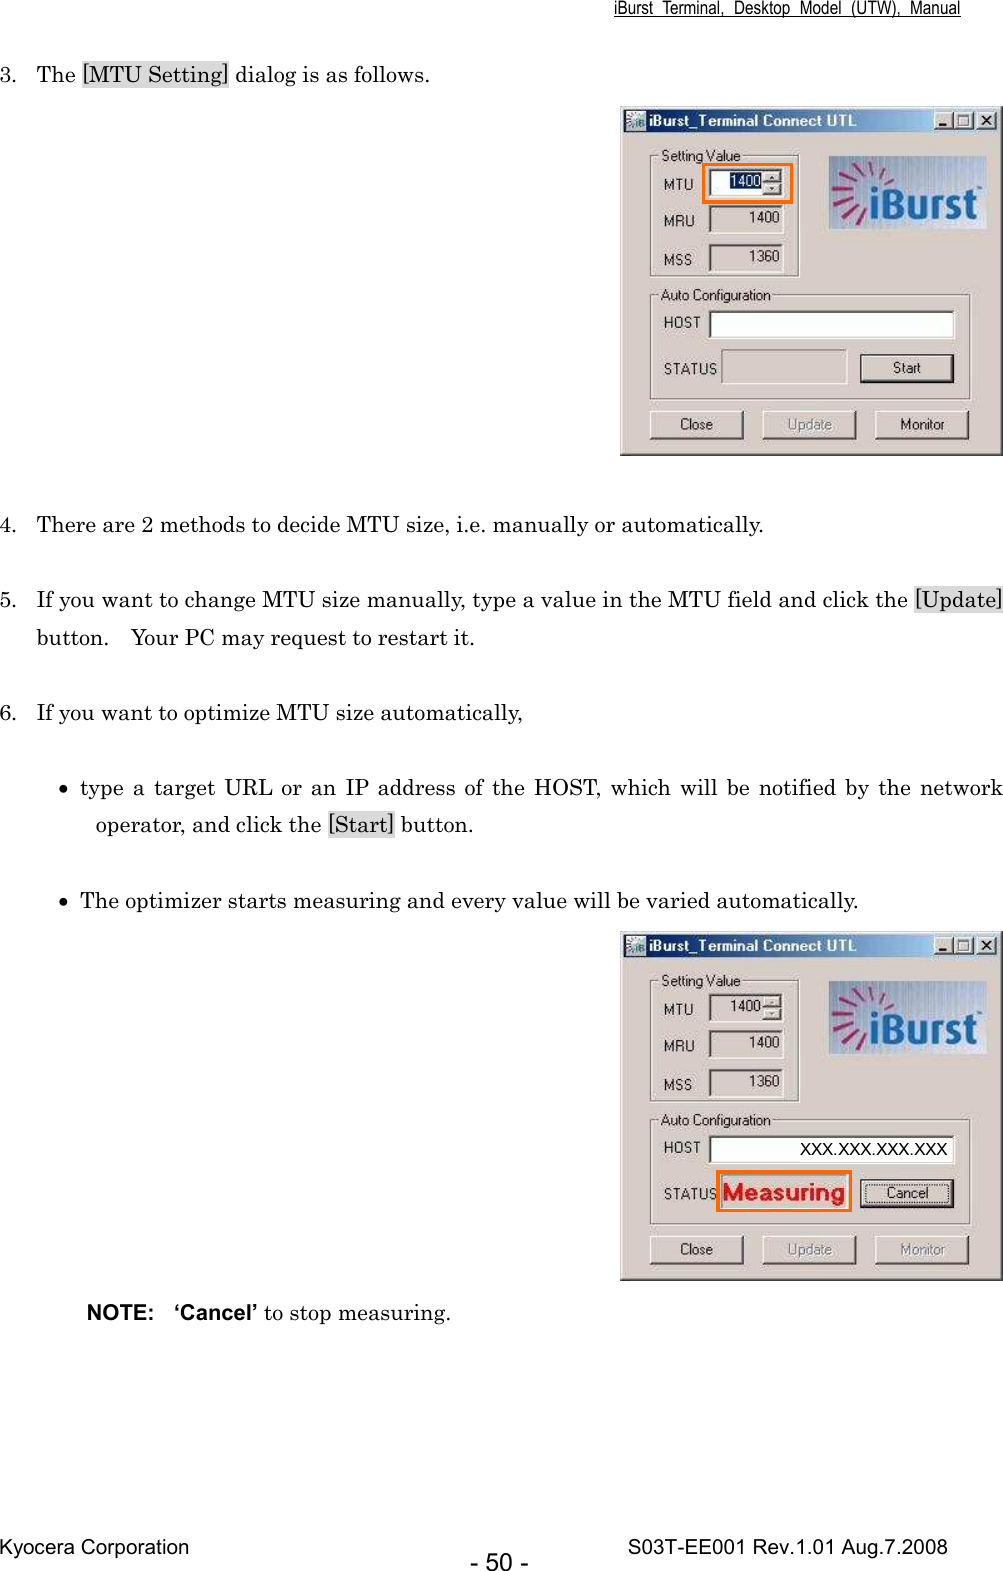 iBurst  Terminal,  Desktop  Model  (UTW),  Manual Kyocera Corporation                                                                                    S03T-EE001 Rev.1.01 Aug.7.2008 - 50 - 3. The [MTU Setting] dialog is as follows.   4. There are 2 methods to decide MTU size, i.e. manually or automatically.  5. If you want to change MTU size manually, type a value in the MTU field and click the [Update] button.    Your PC may request to restart it.  6. If you want to optimize MTU size automatically,  • type a  target URL or  an  IP address of  the HOST,  which  will  be  notified by  the network operator, and click the [Start] button.  • The optimizer starts measuring and every value will be varied automatically.  NOTE:  ‘Cancel’ to stop measuring.  XXX.XXX.XXX.XXX 